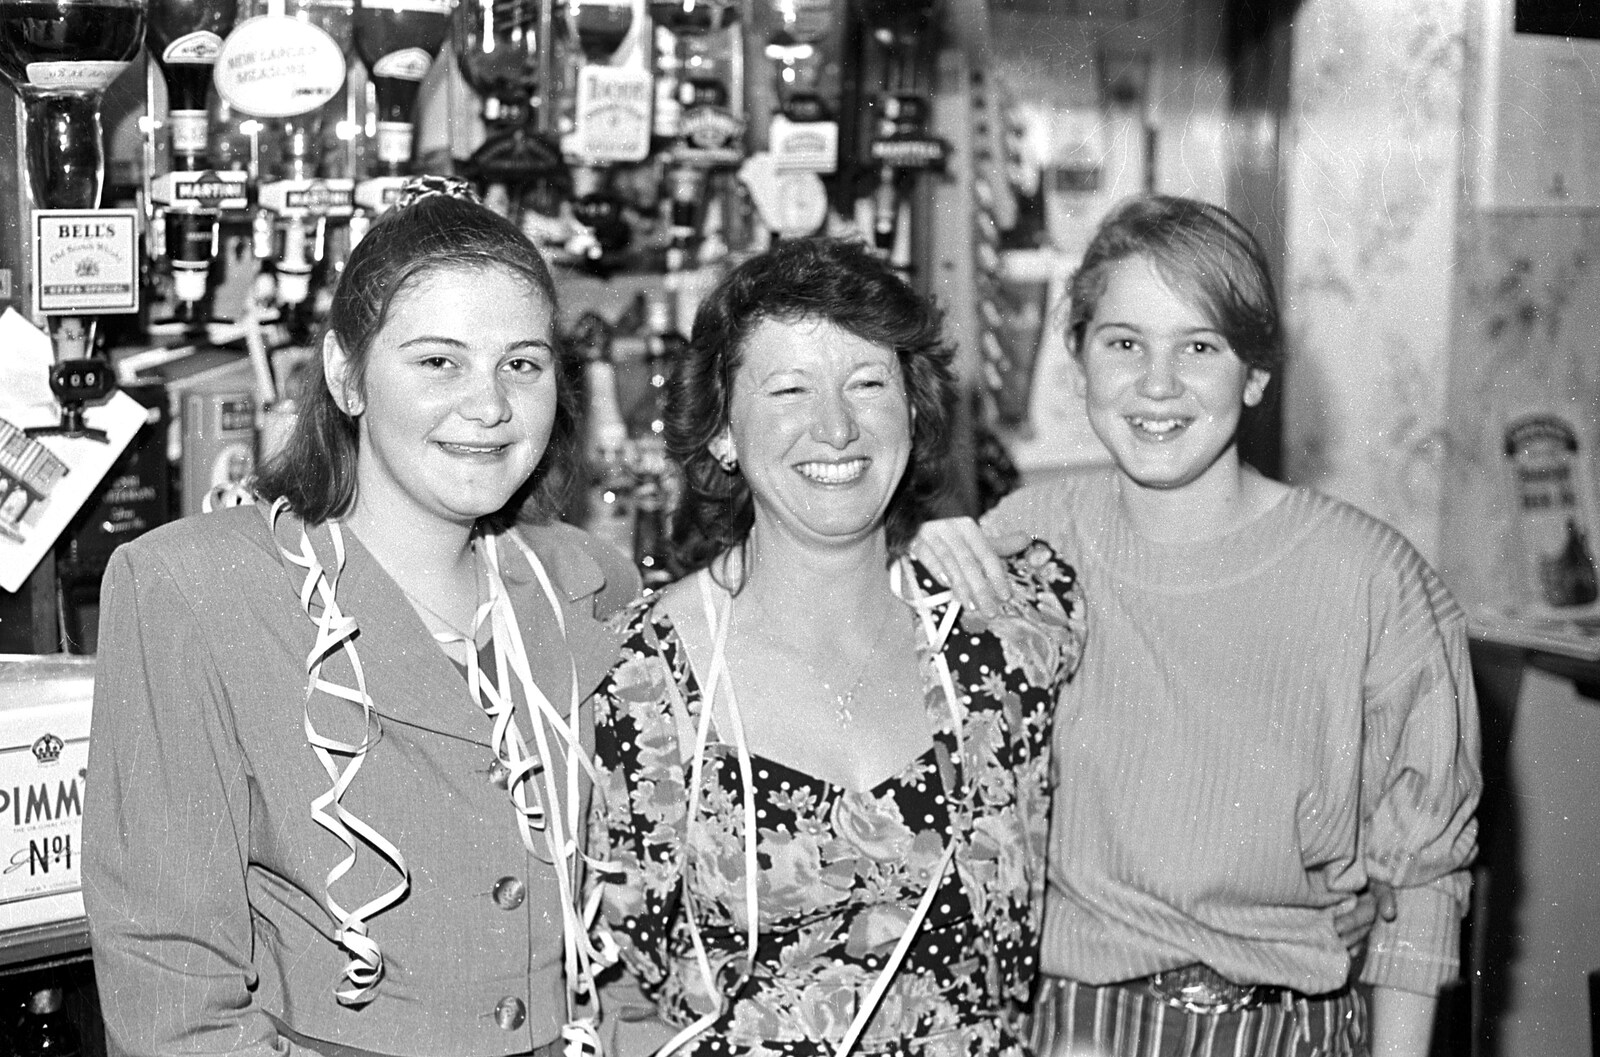 Claire, Sylvia and Lorraine from New Year's Eve at the Swan Inn, Brome, Suffolk - 31st December 1992